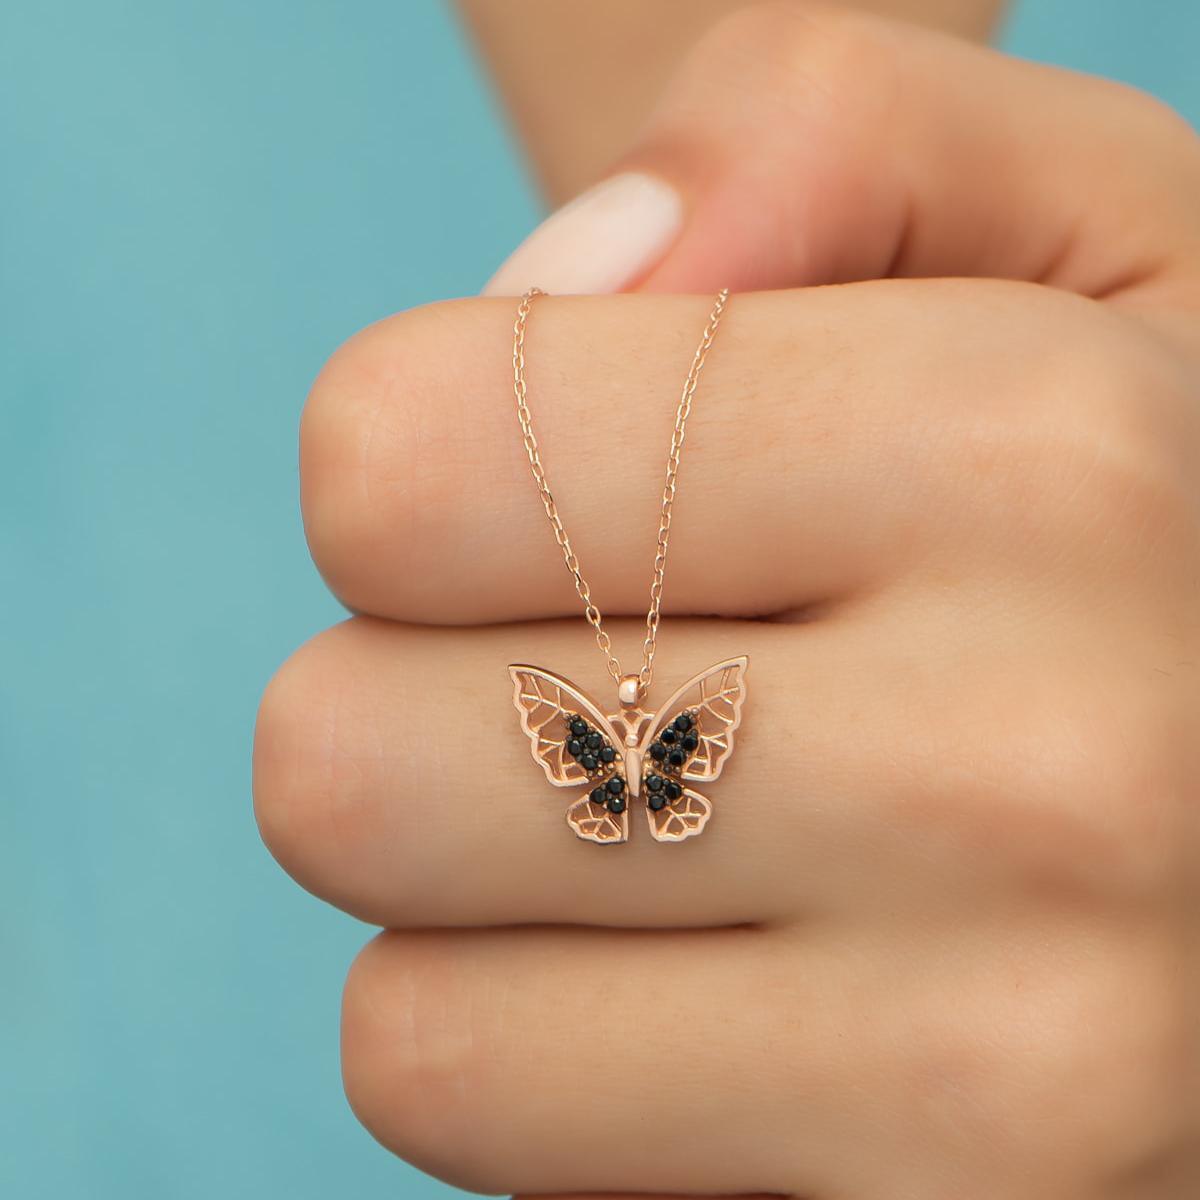 Black Zirconia Butterfly Necklace • Black Butterfly Pendant Necklace - Trending Silver Gifts